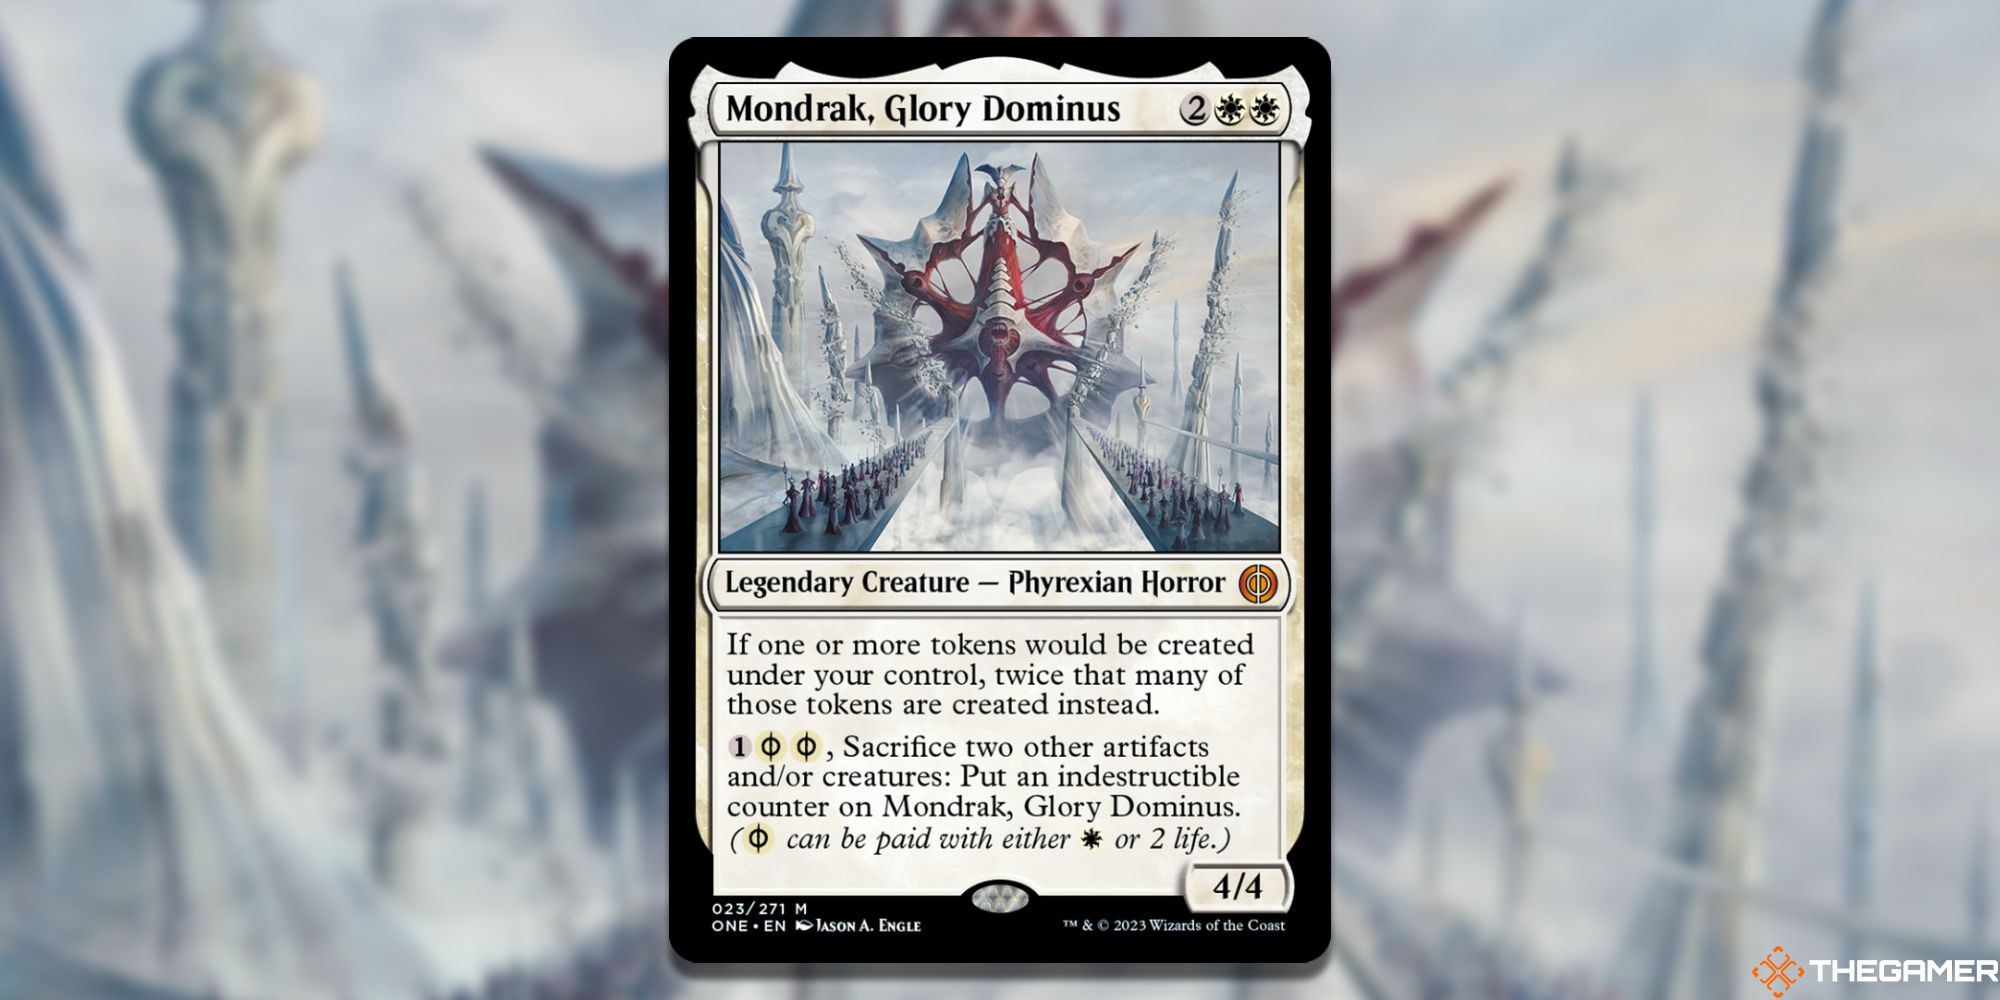 Image of the Mondrak Glory Dominus card in Magic: The Gathering, with art by Jason A. Engle